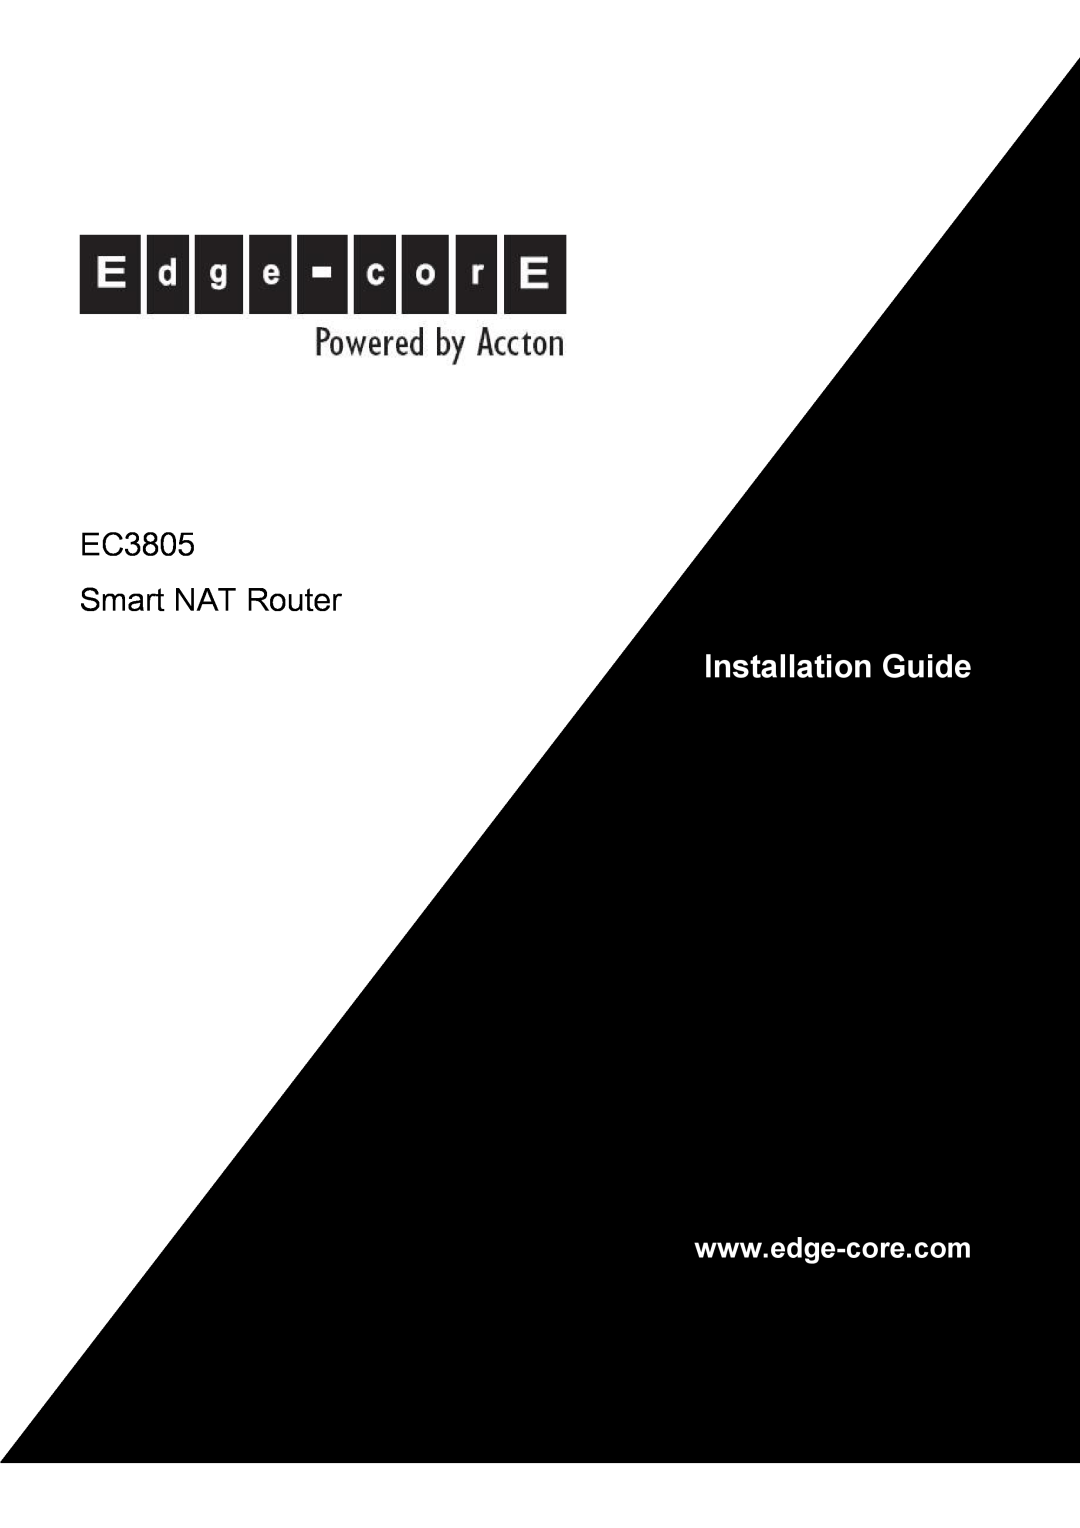 Accton Technology manual EC3805 Smart NAT Router, Installation Guide 